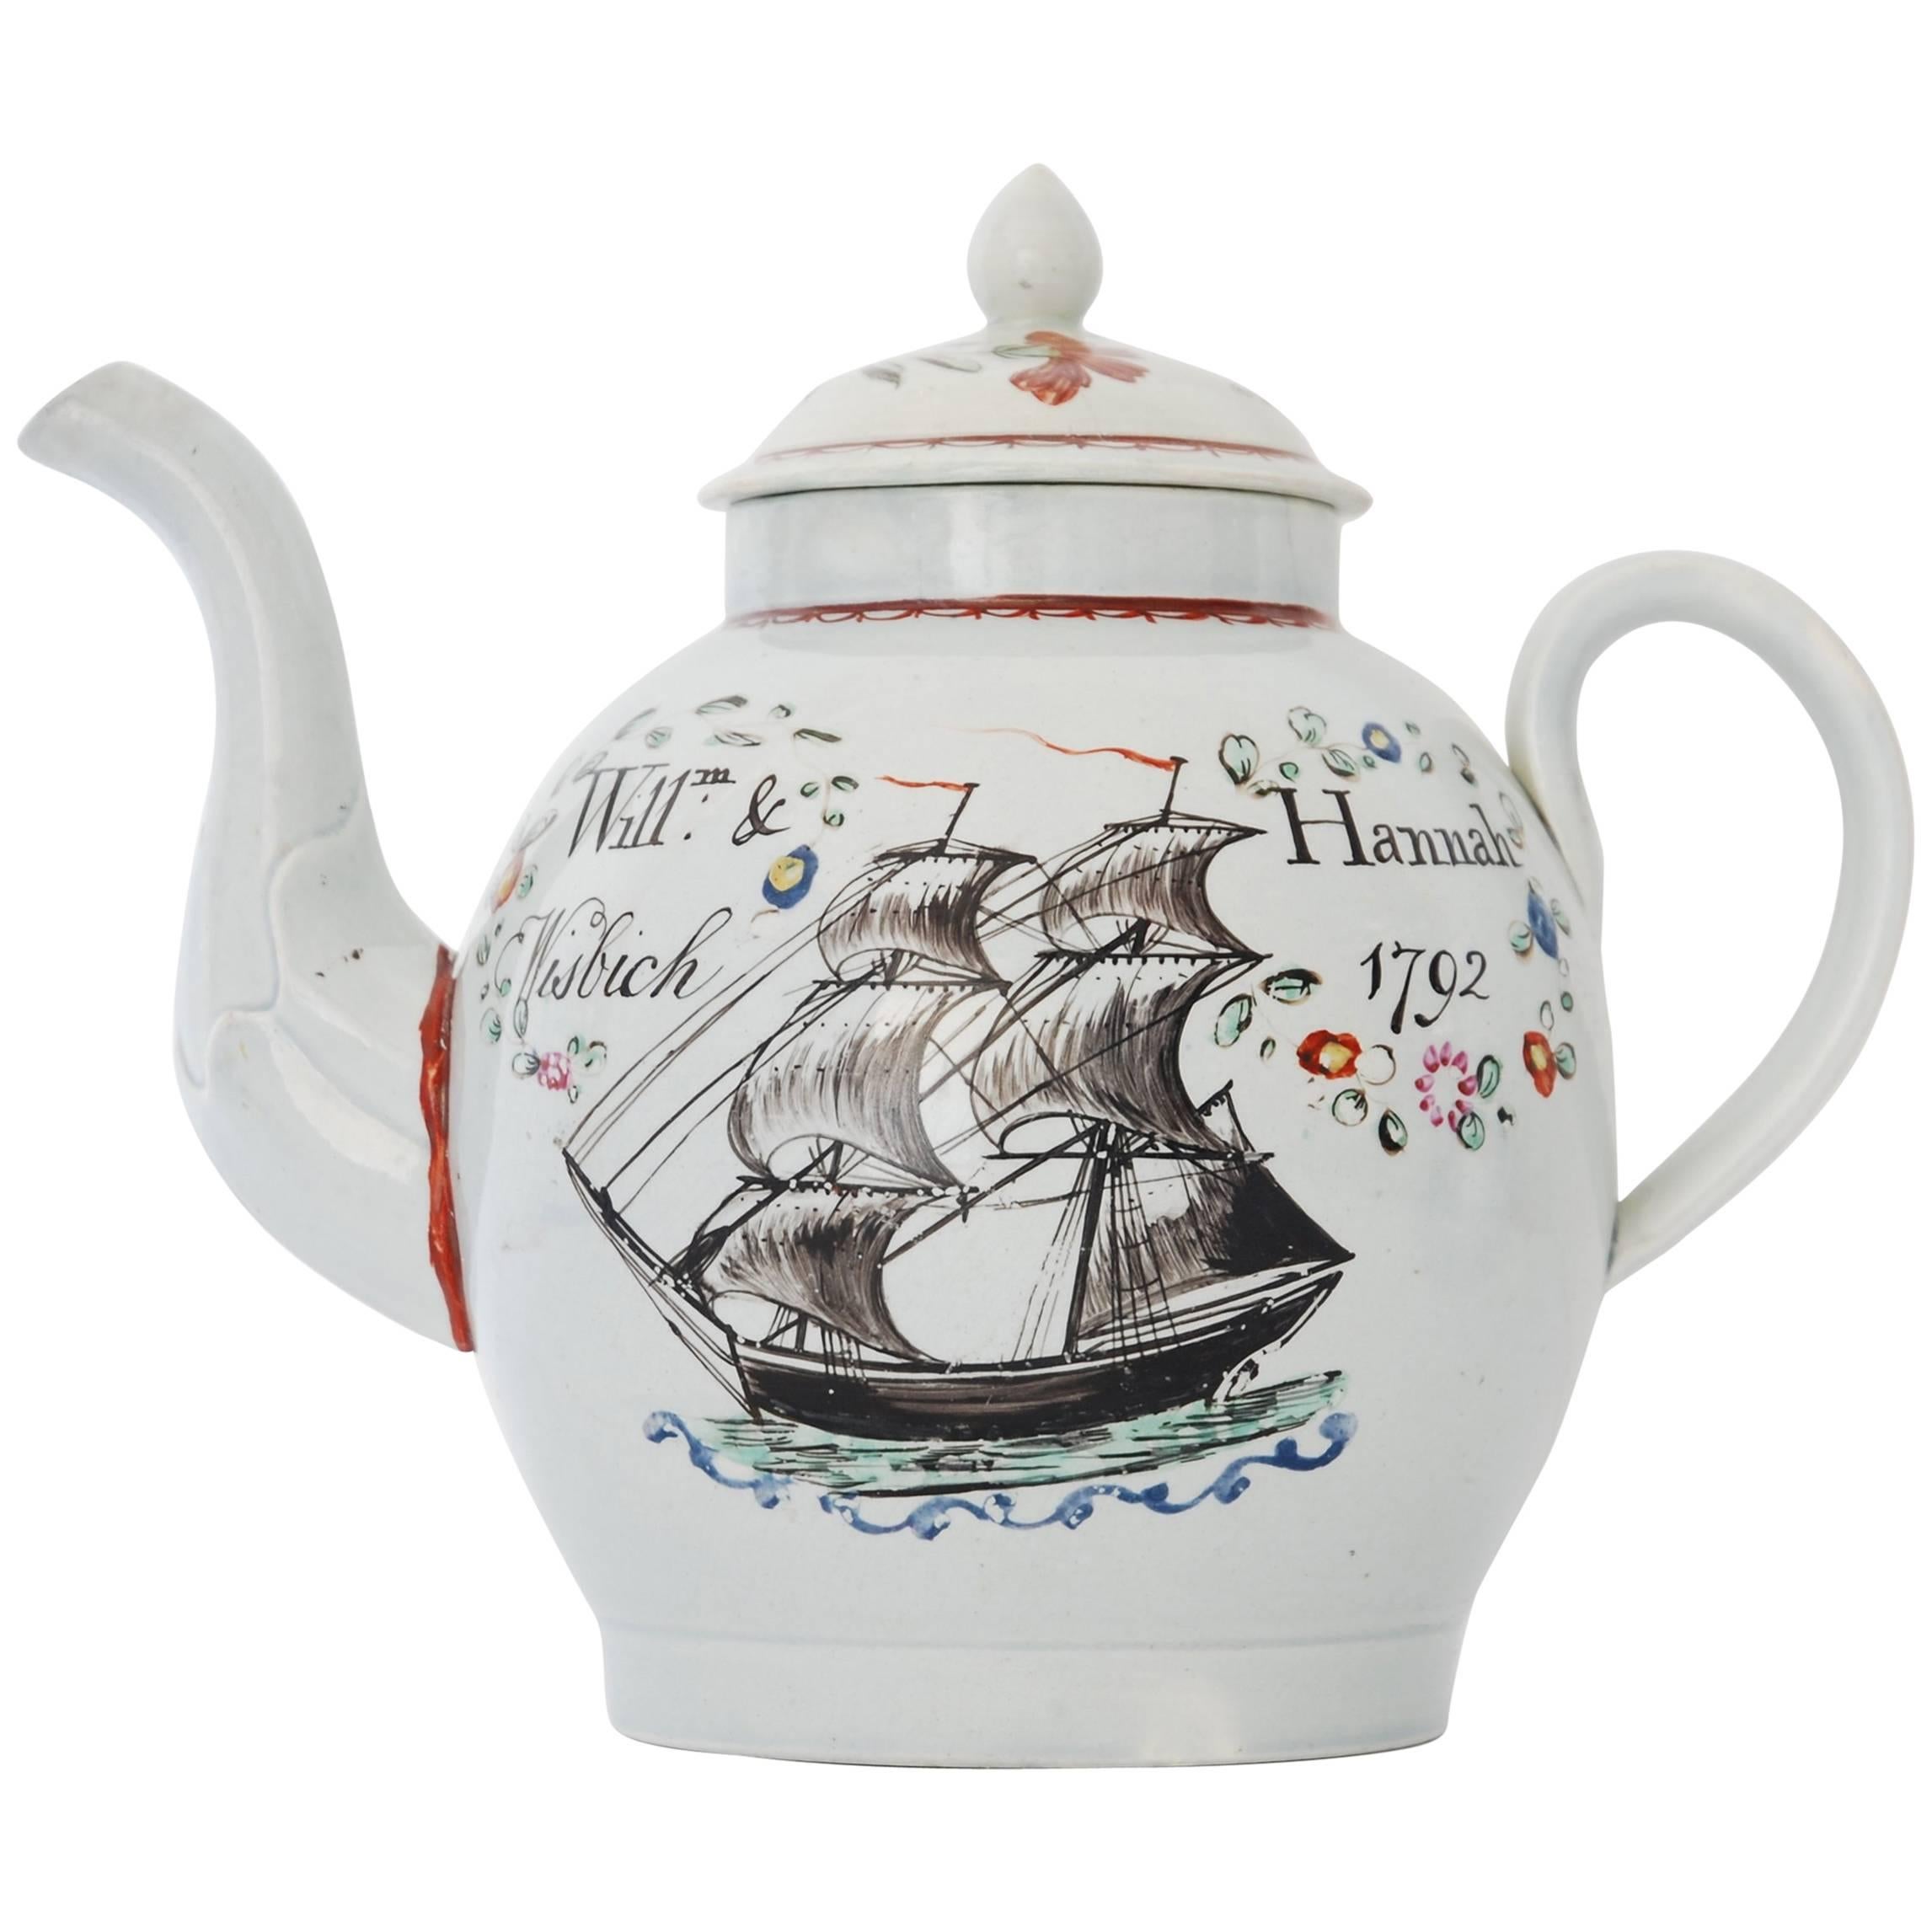 Dated Pearlware Teapot with Ship, English, 1792